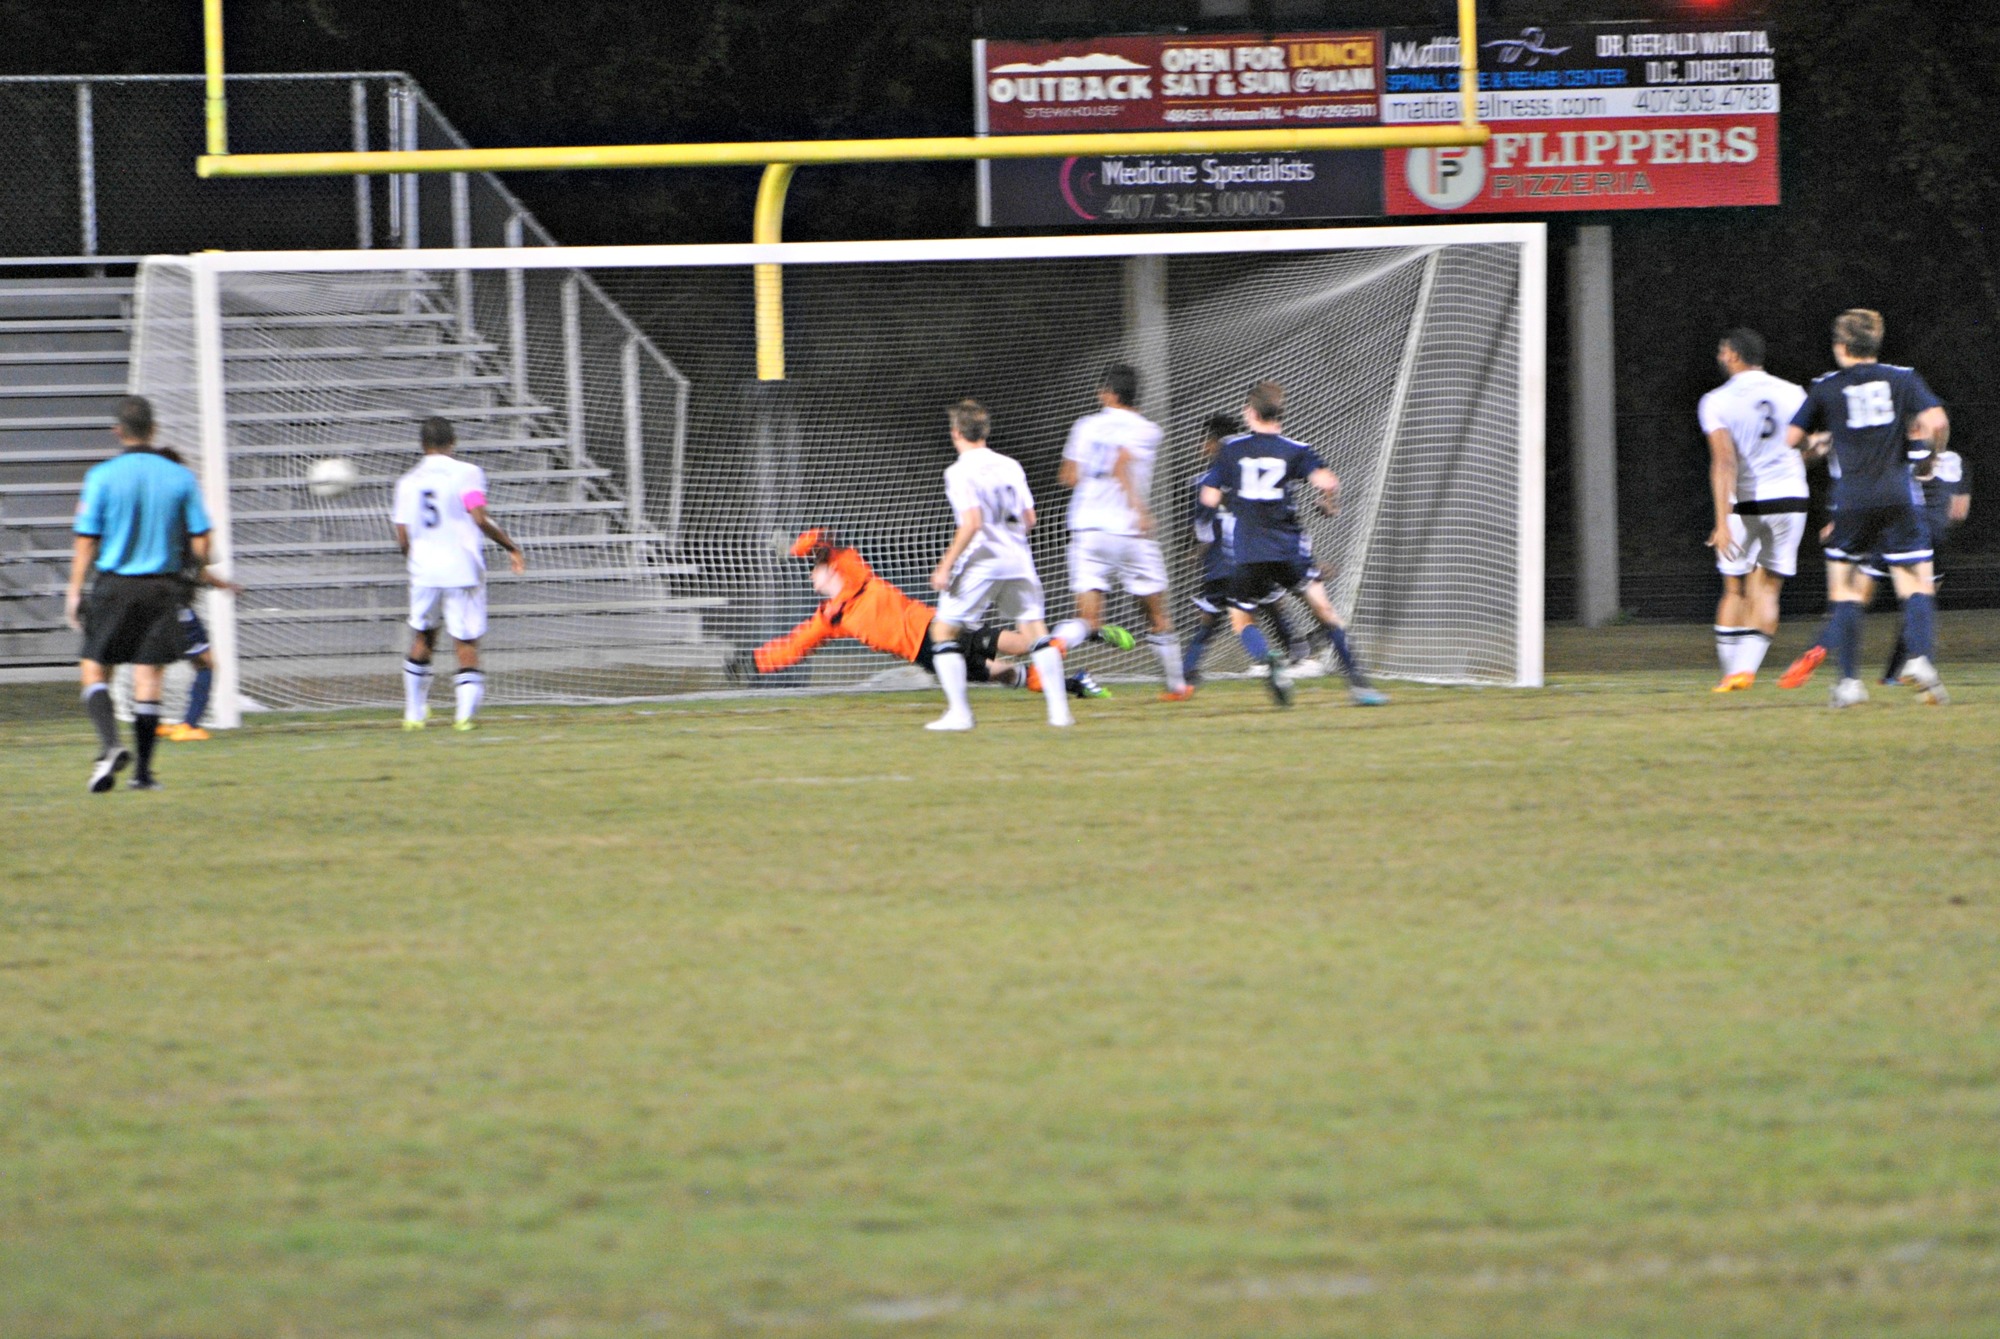 This Cesar Gonzalez free kick into the far corner of the net was the lone goal for the Panthers.